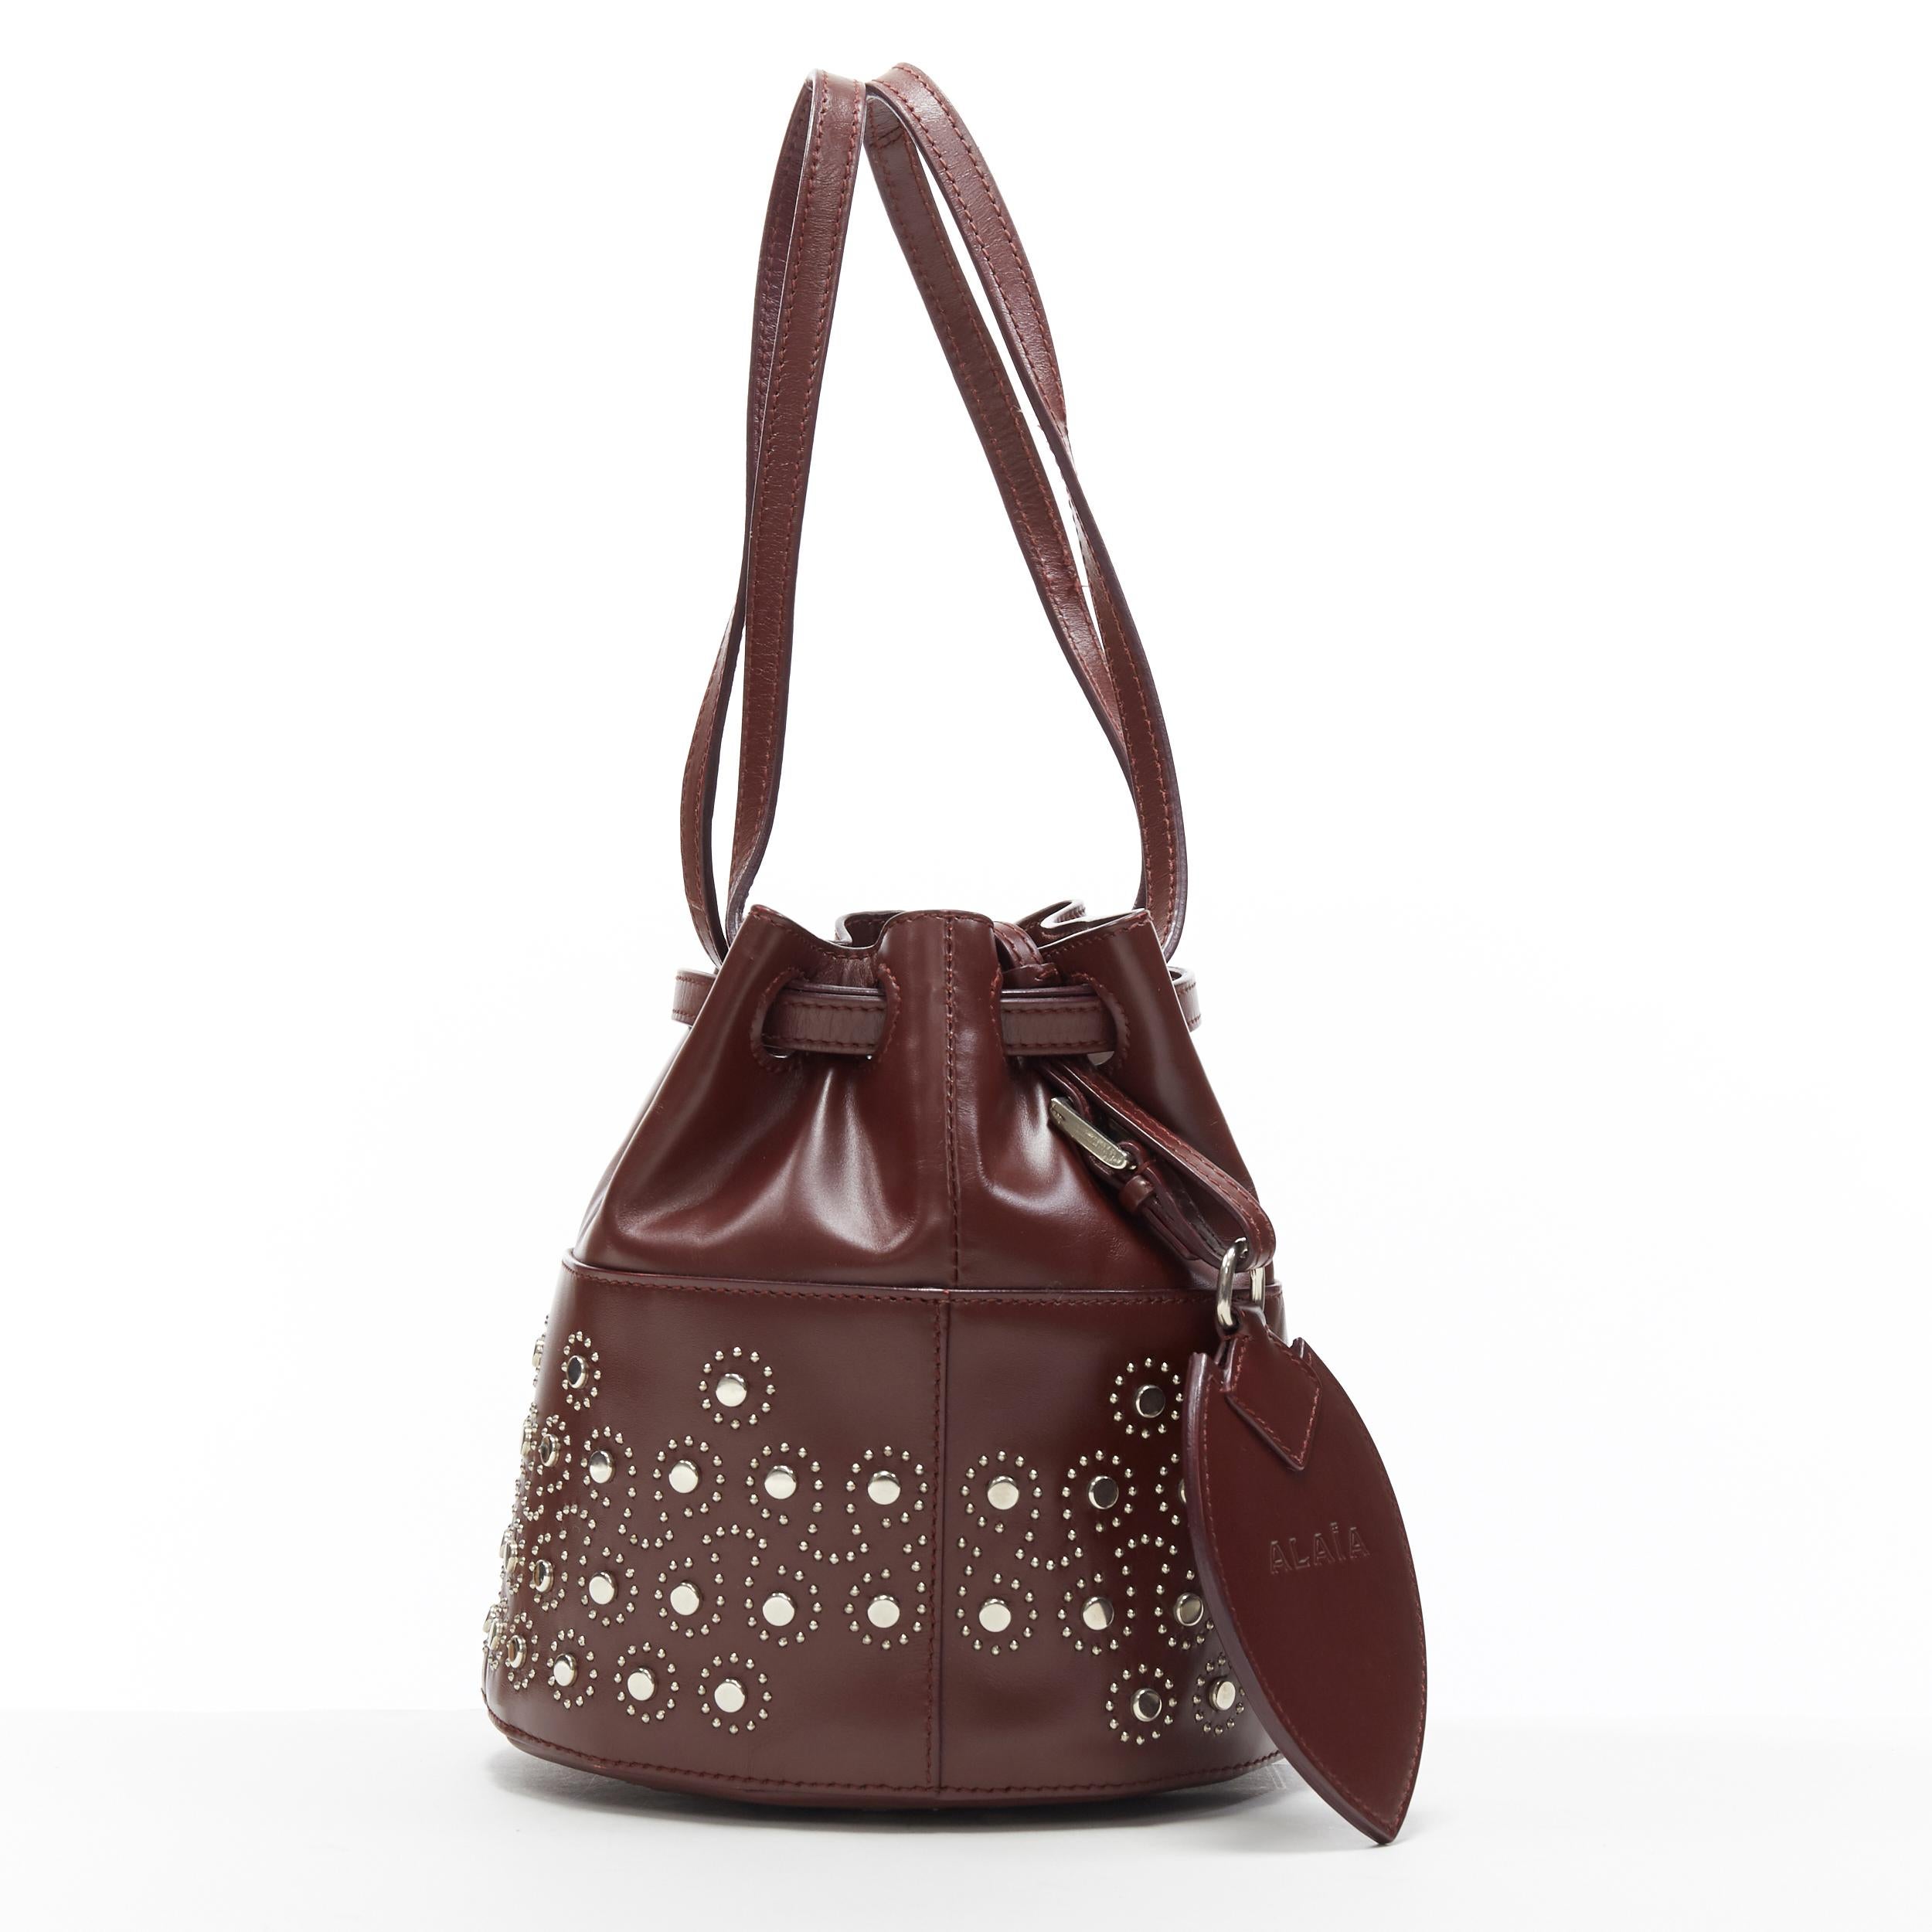 ALAIA burgundy red geometric silver studded drawstring mirror charm bucket bag
Brand: Alaia
Model Name / Style: Studded bucket bag
Material: Leather
Color: Burgundy
Pattern: Solid
Closure: Drawstring
Extra Detail: Top Handle.
Made in: